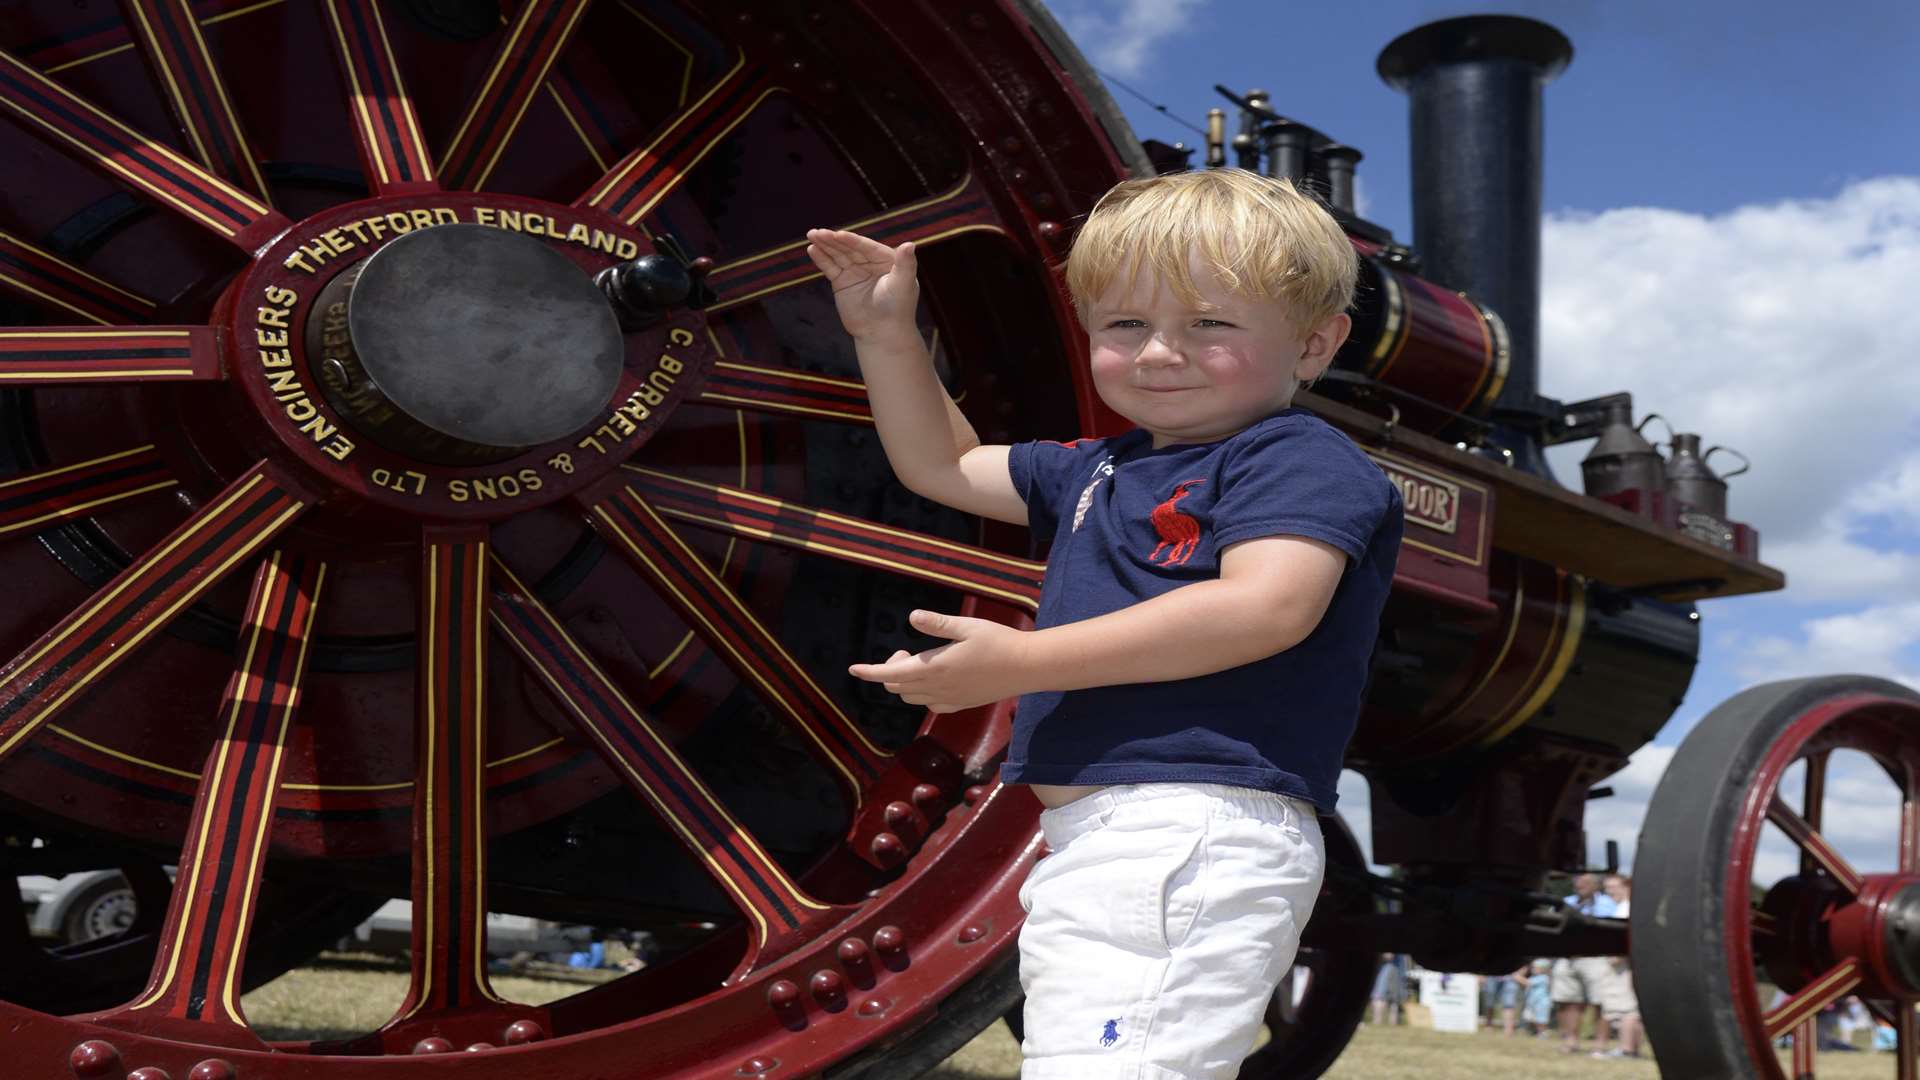 Jake Skinner, three, admires one of the many traction engines at the Weald of Kent Steam Rally at Woodchurch. Picture: Chris Davey